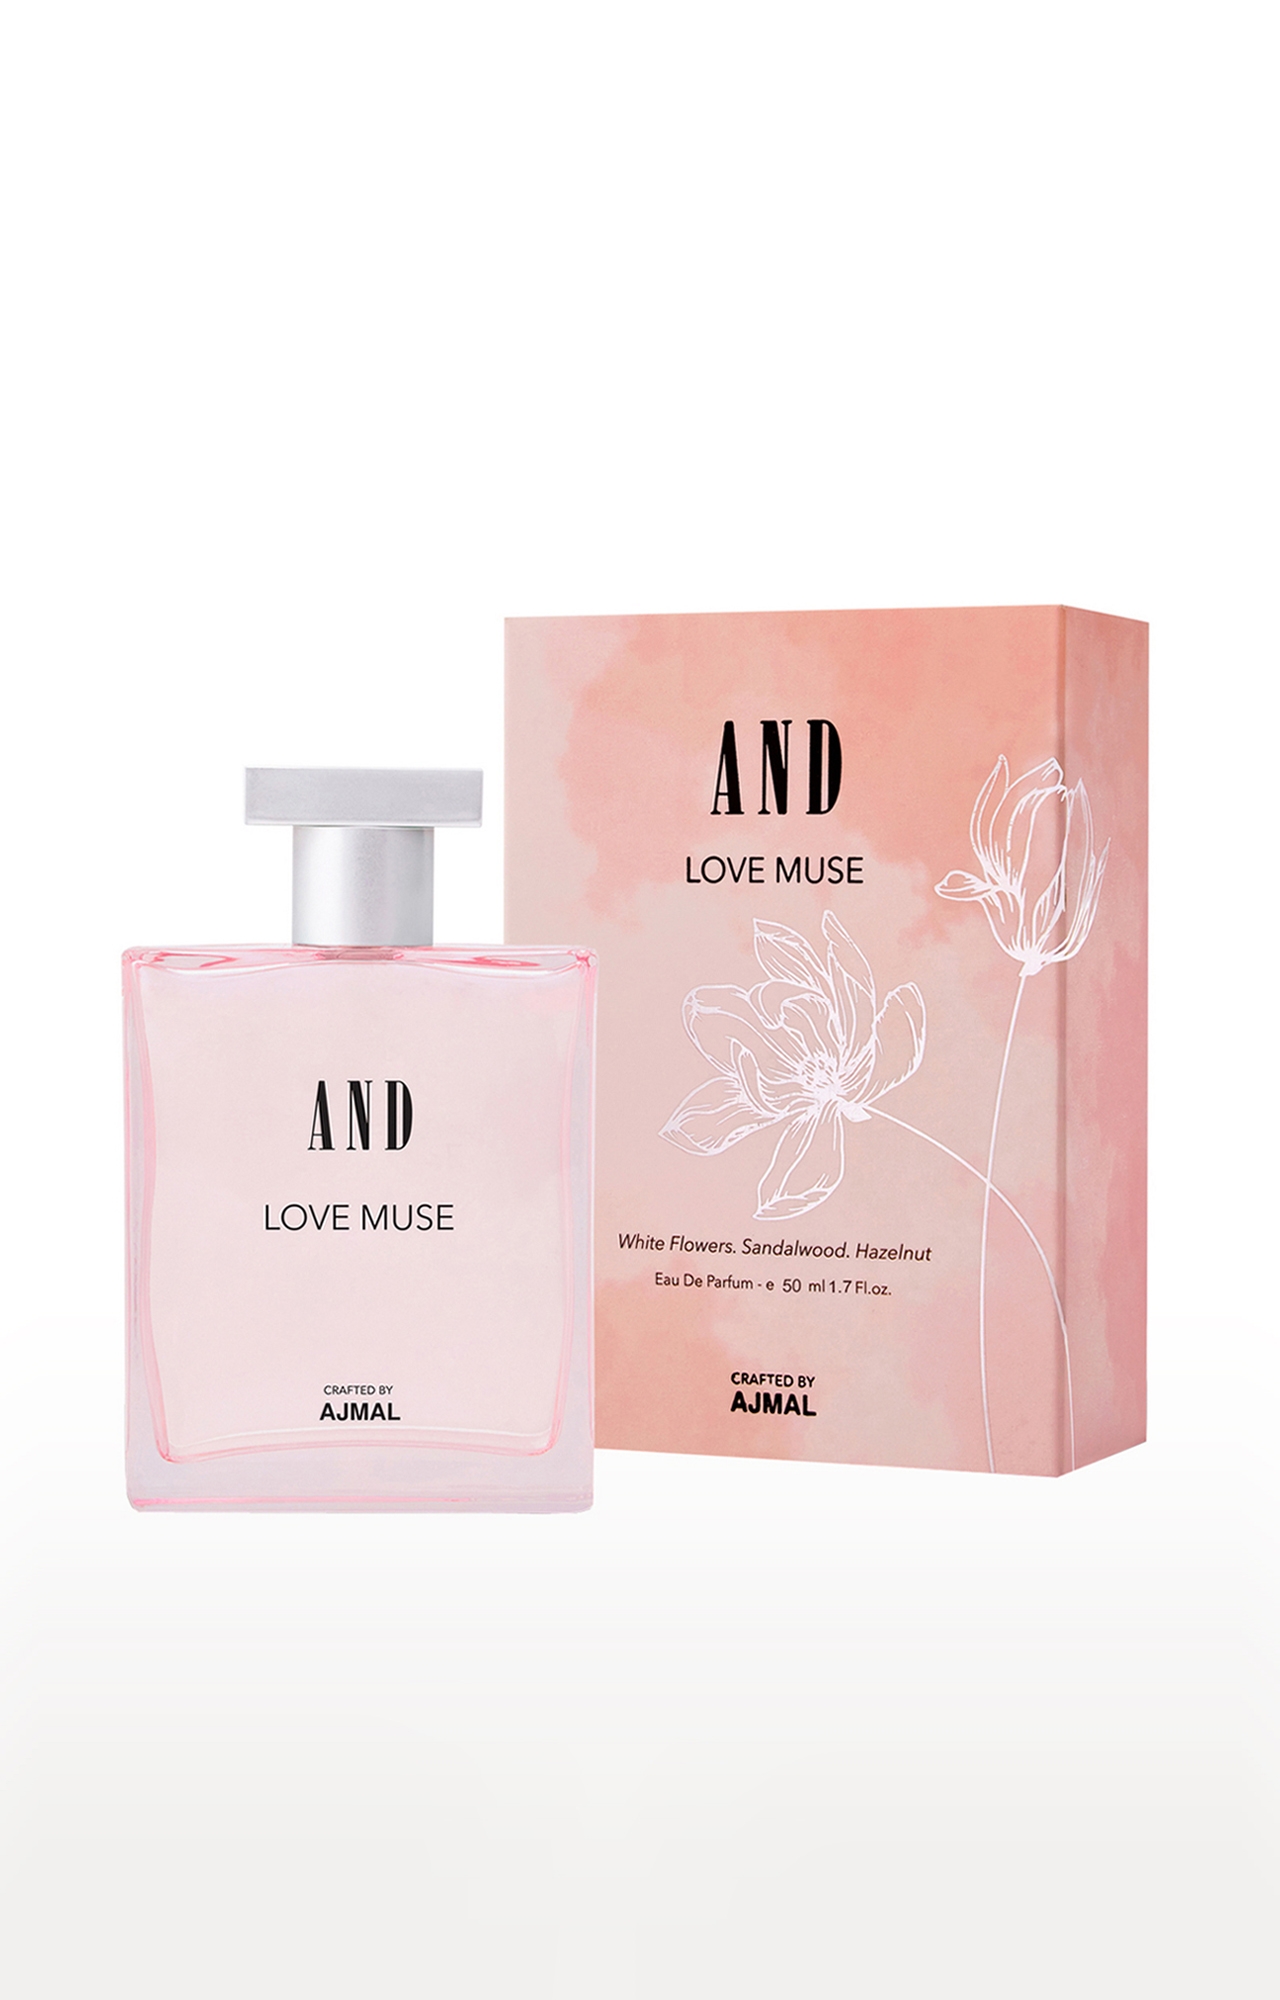 AND Crafted By Ajmal | And Love Muse Eau De Parfum 50ML Long Lasting Scent Spray Gift For Women Crafted By Ajmal 0